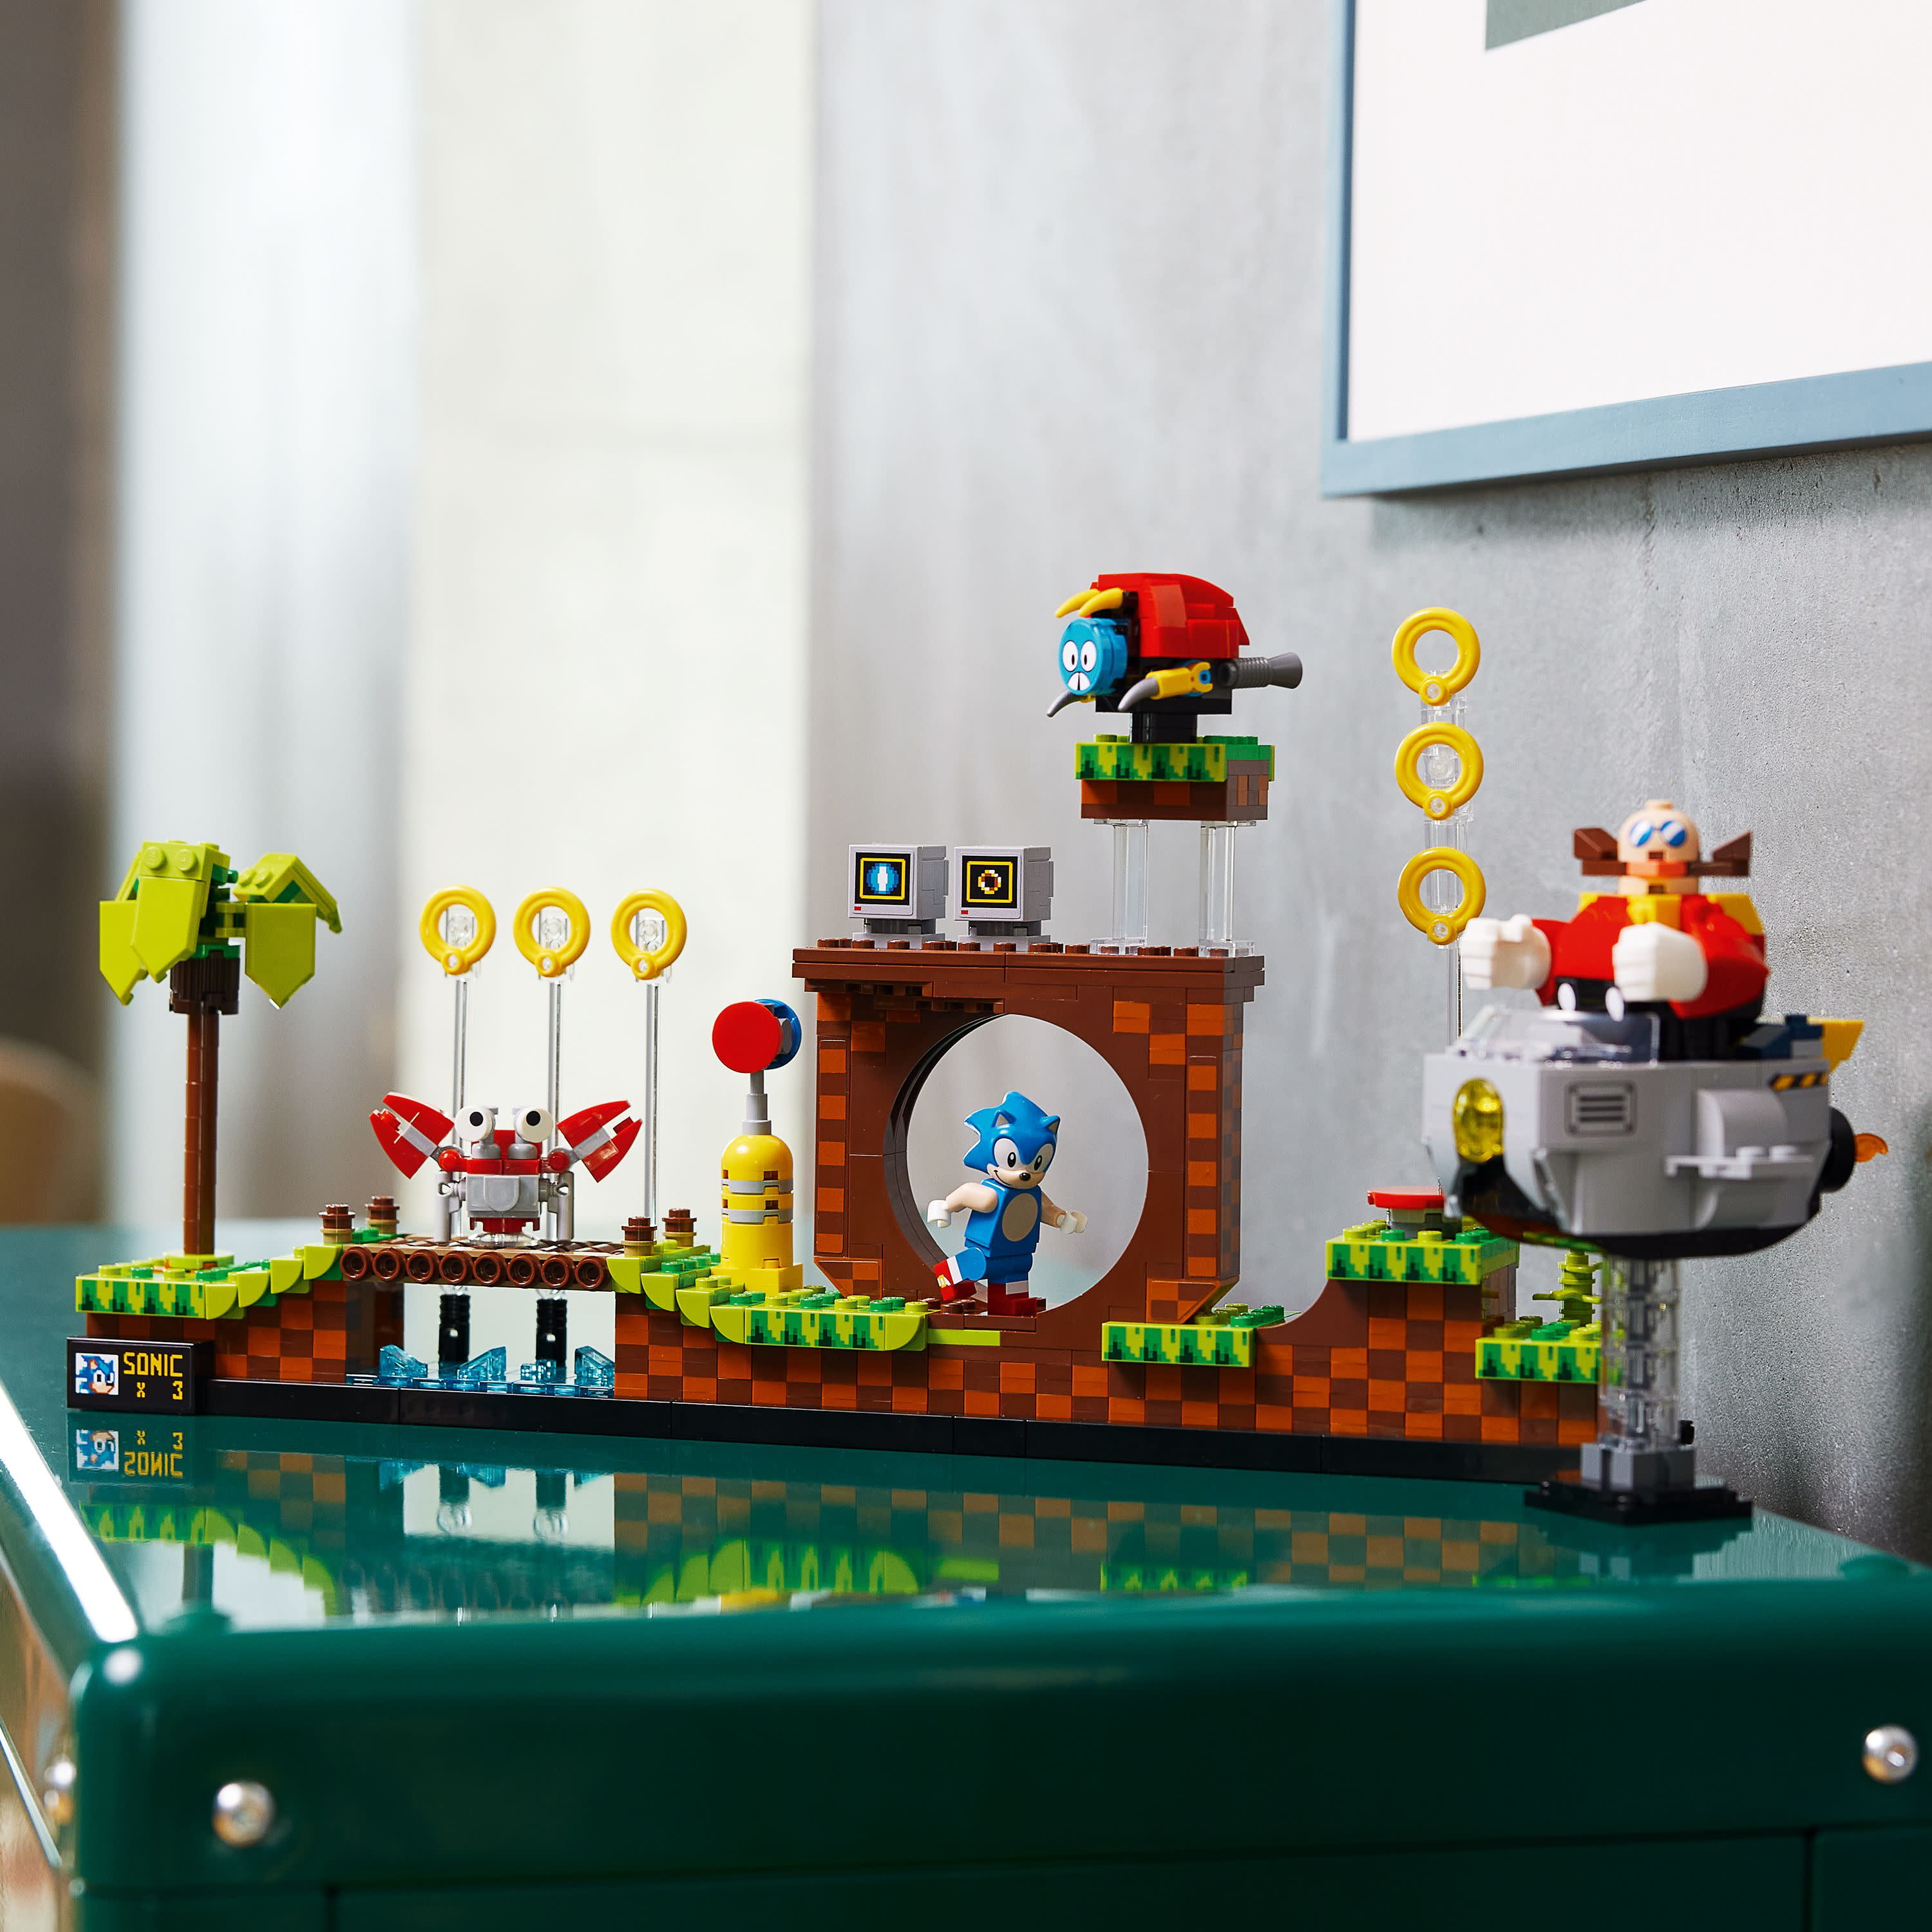 LEGO Ideas: Sonic the Hedgehog - Green Hill Zone (21331) Complete